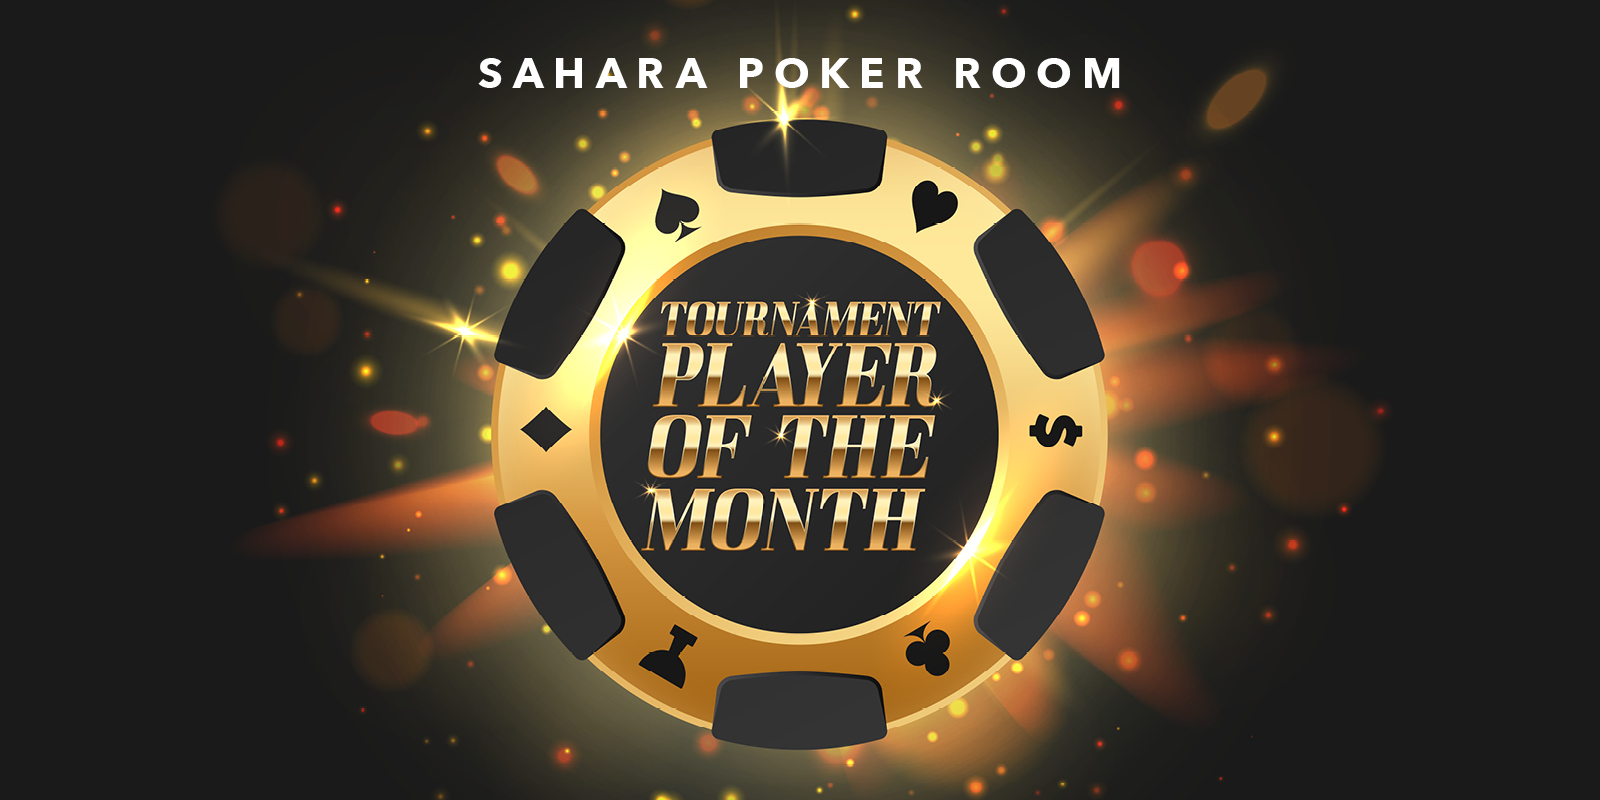 Large poker chip with Tournament Player of the Month copy inside and SAHARA poker room written above the poker chip